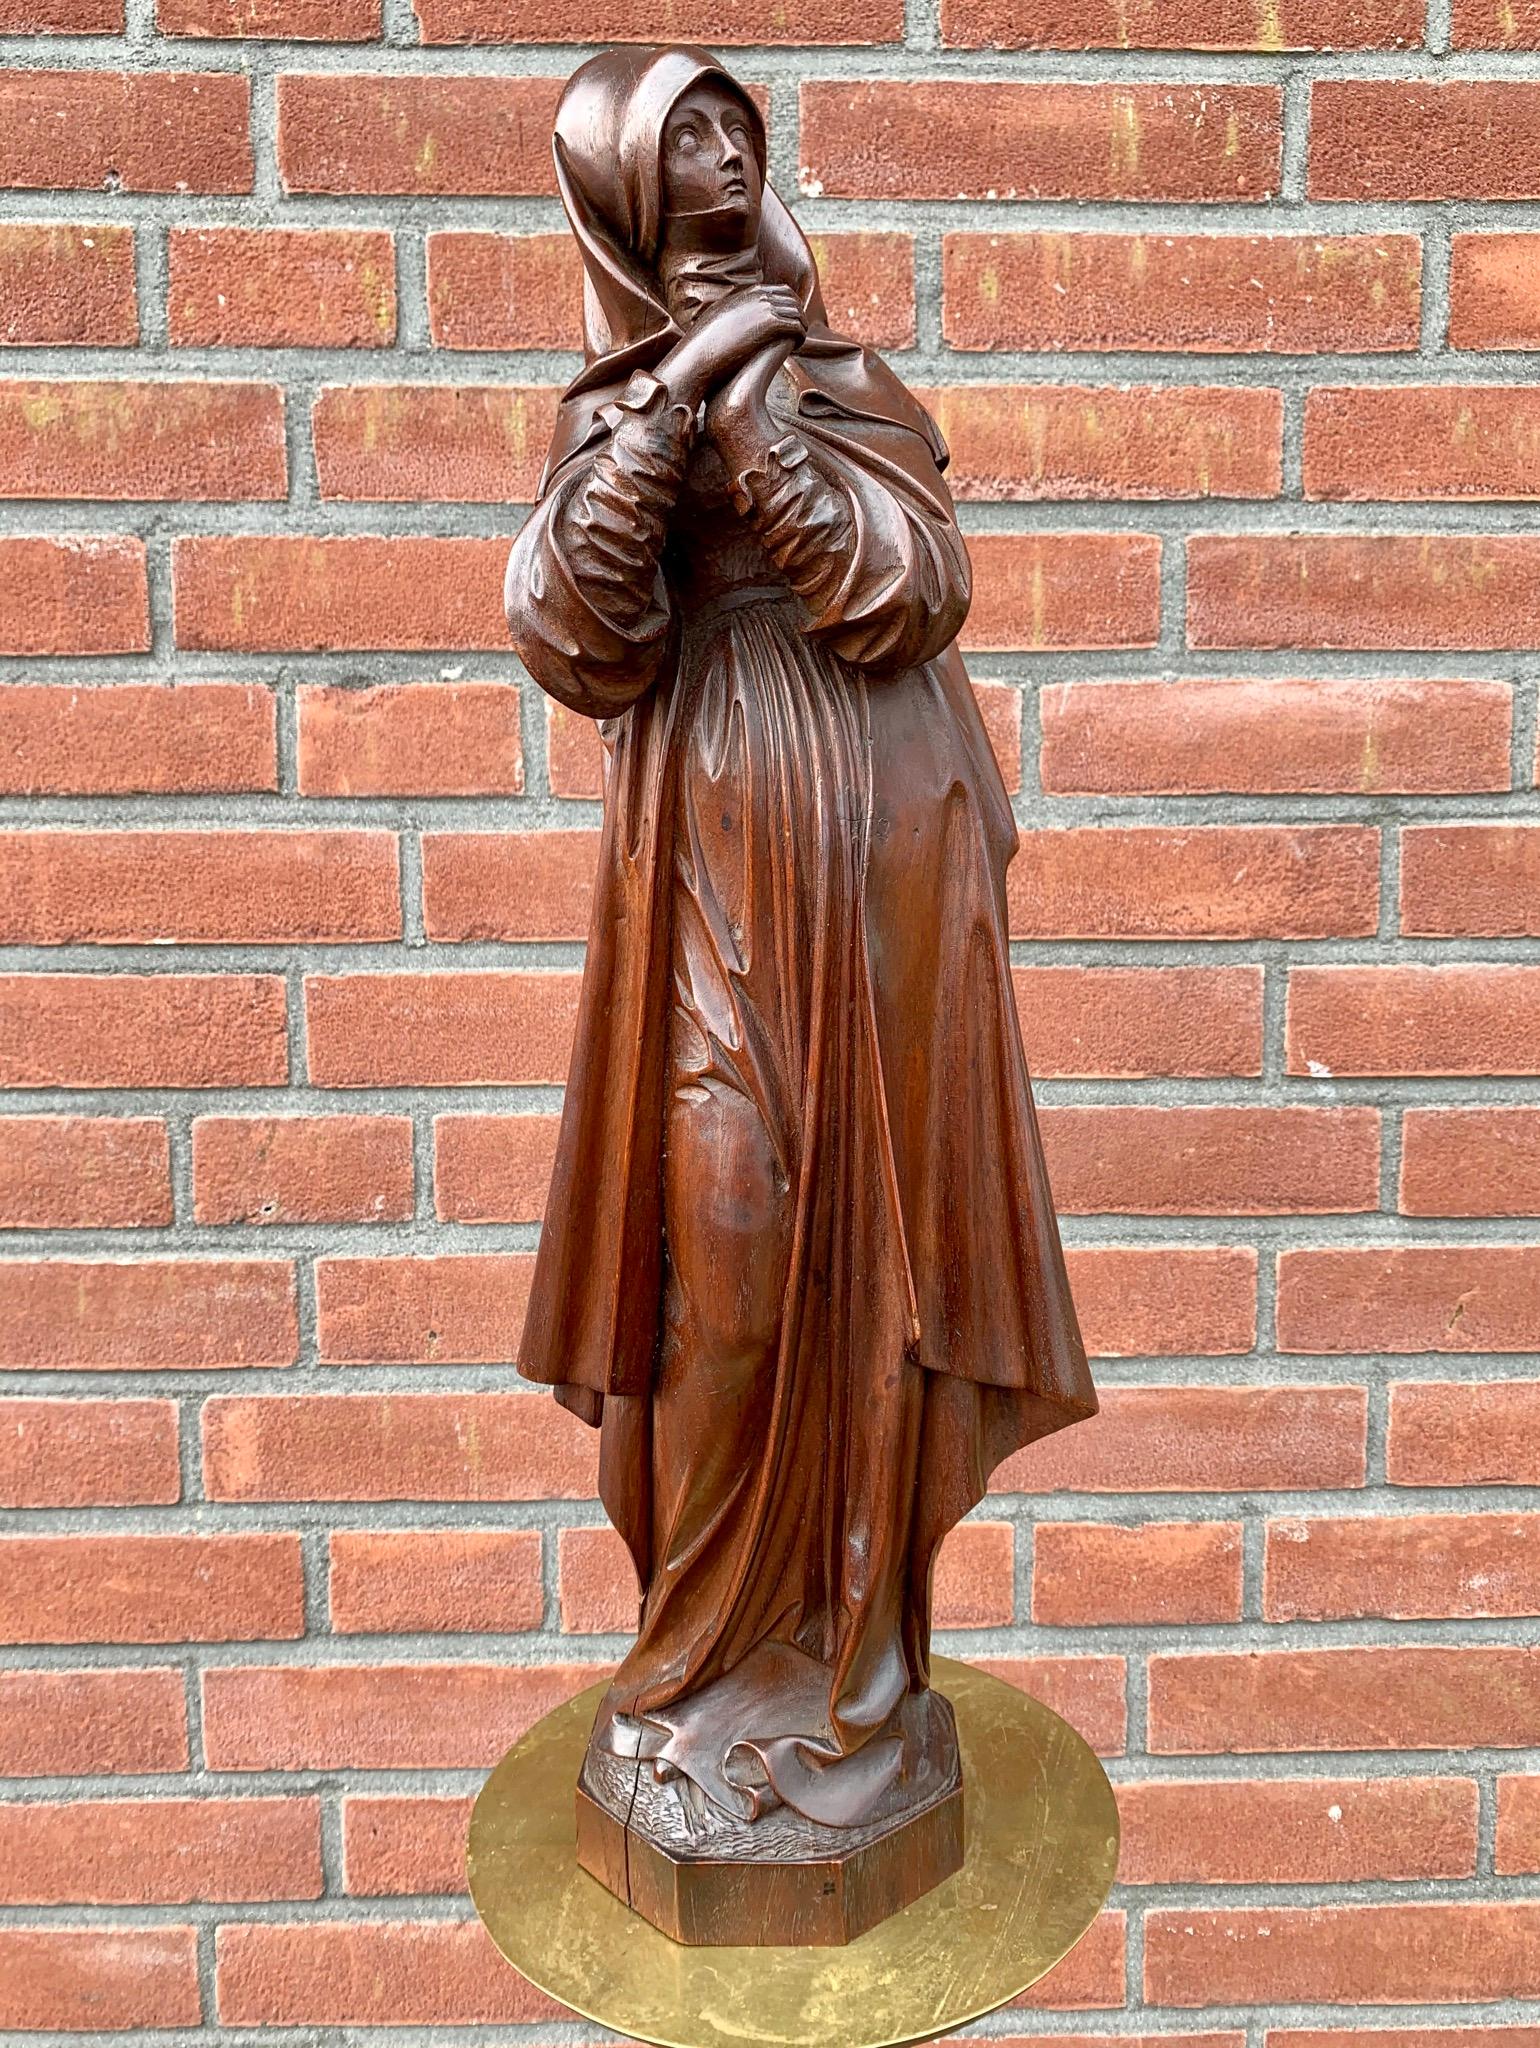 Stunning, hand carved work of devotional art with a beautiful patina.

Saint Teresa of Ávila, born Teresa Sánchez de Cepeda y Ahumada, also called Saint Teresa of Jesus (1515-1582), was a Spanish noblewoman who chose a monastic life in the Roman